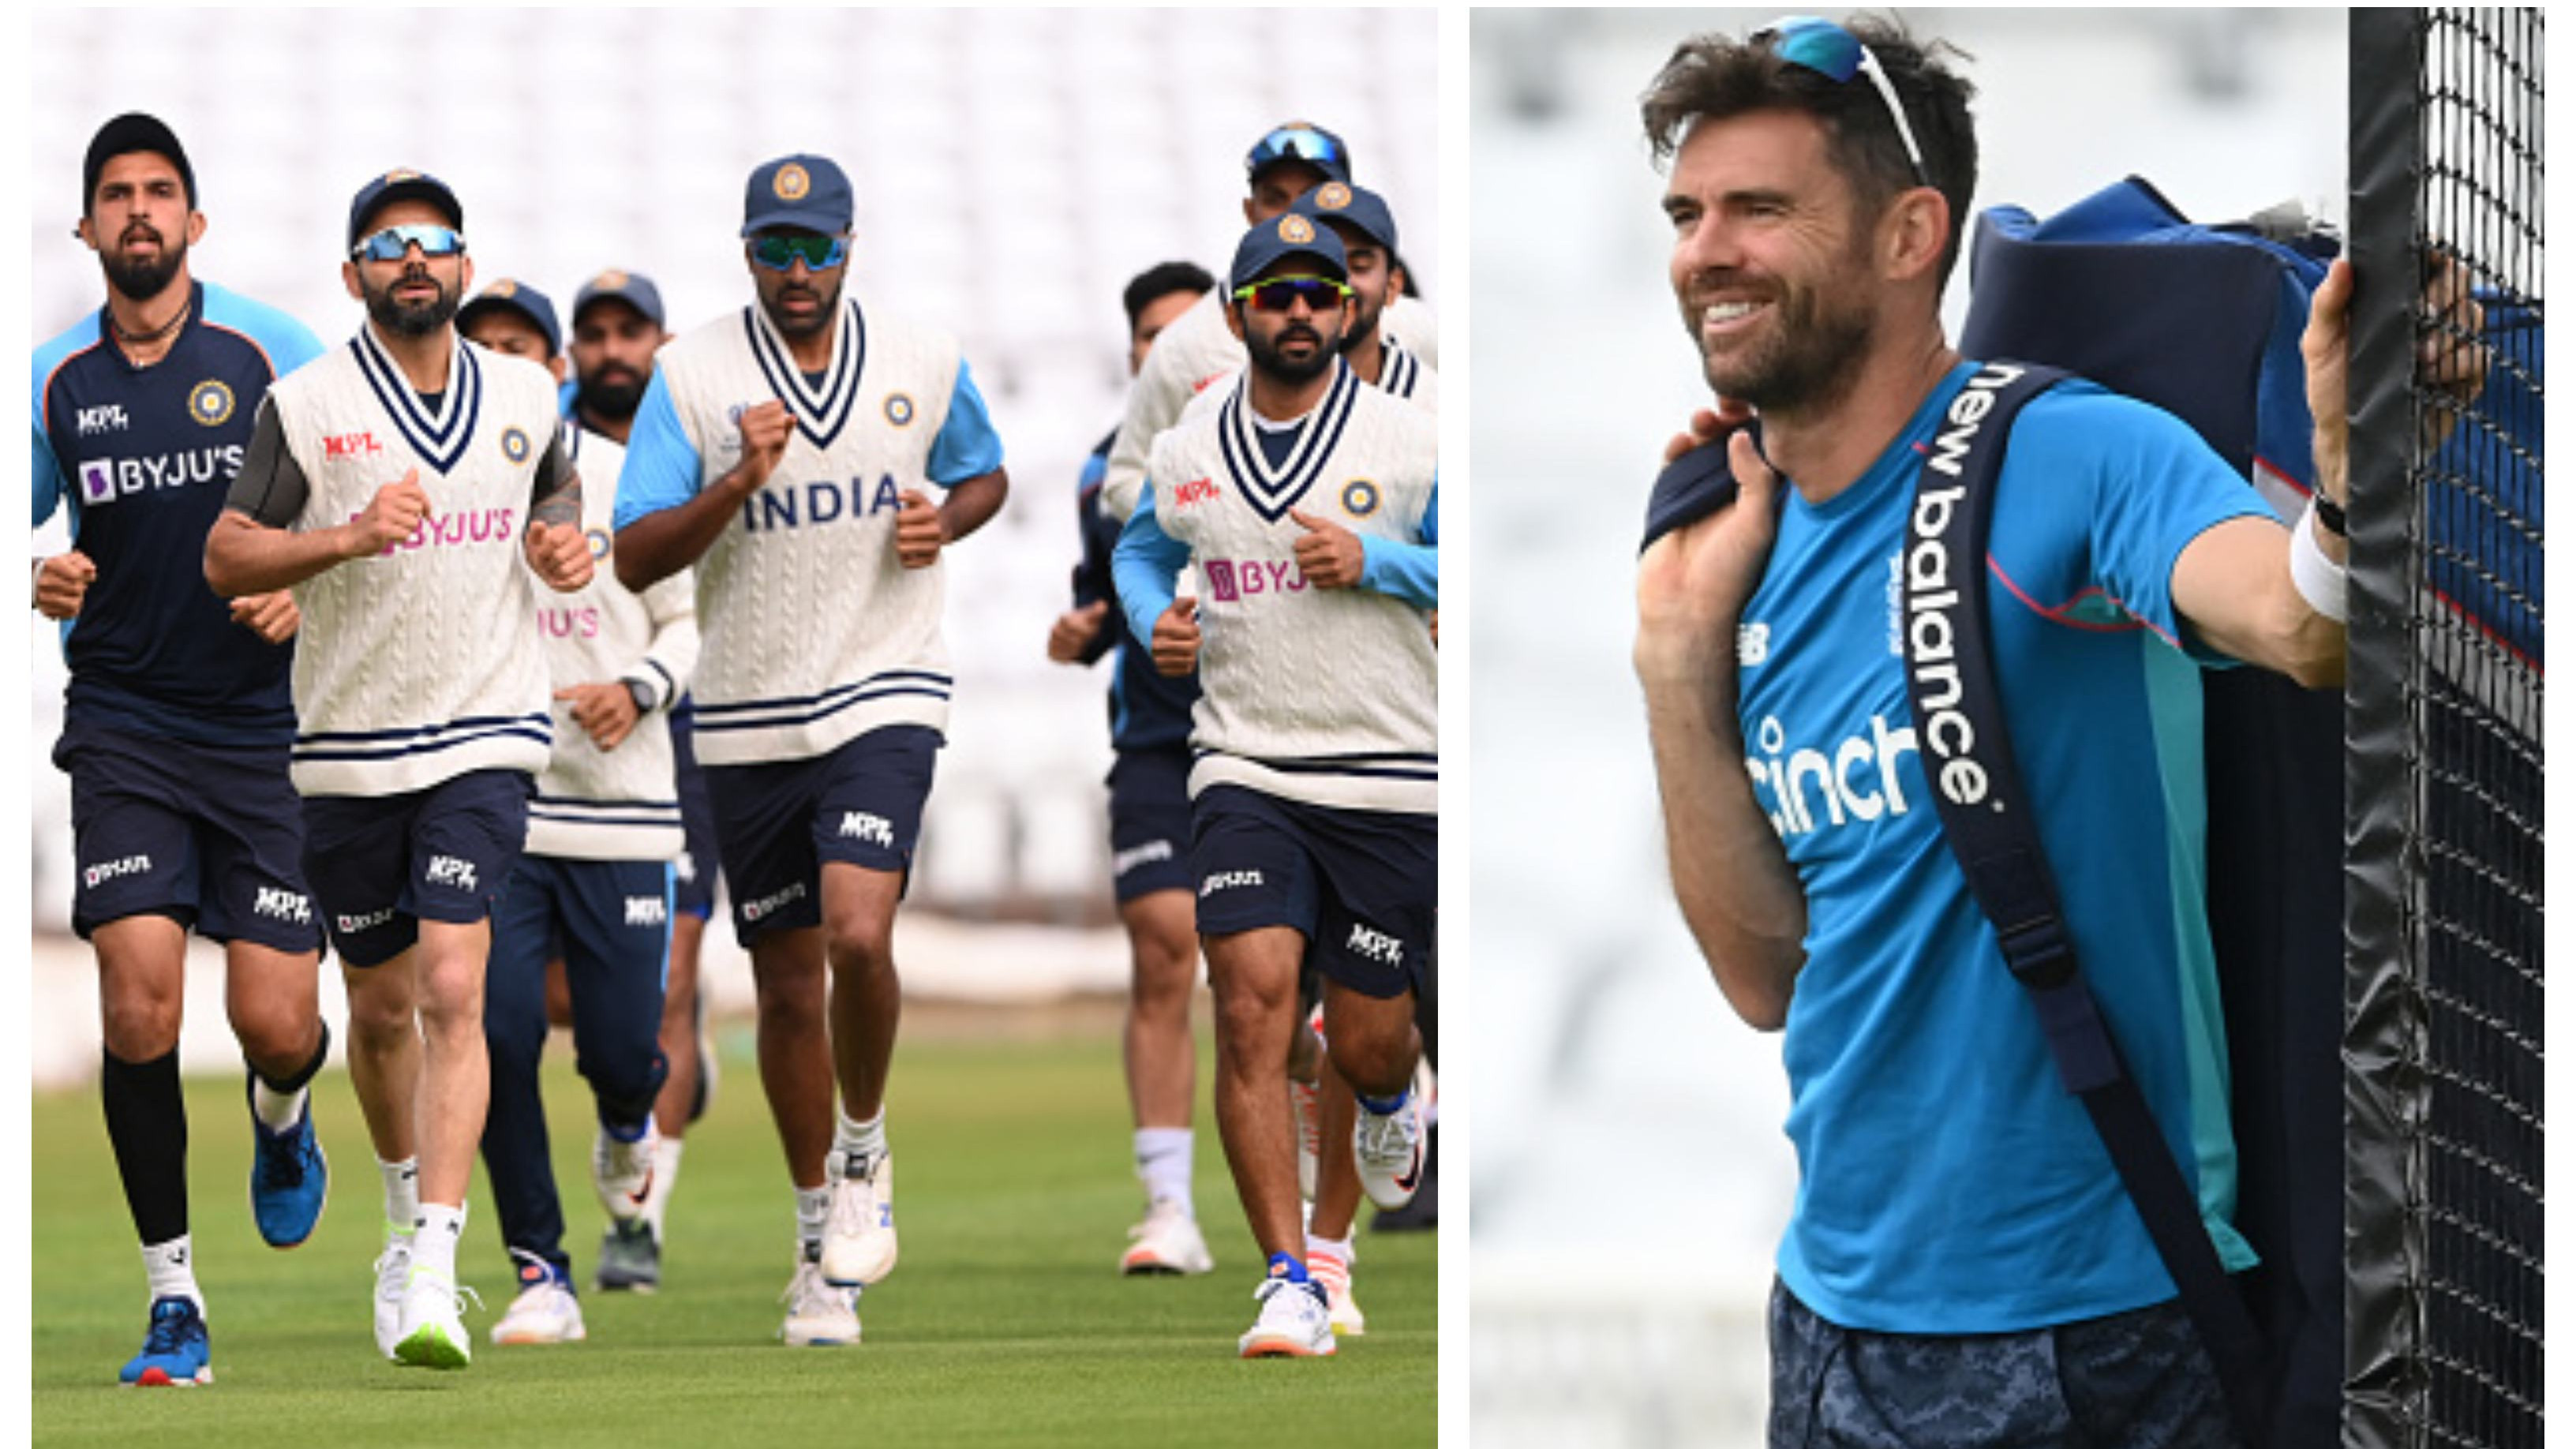 ENG v IND 2021: ‘Don't think India can have any complaints if we leave a bit of grass’, says James Anderson